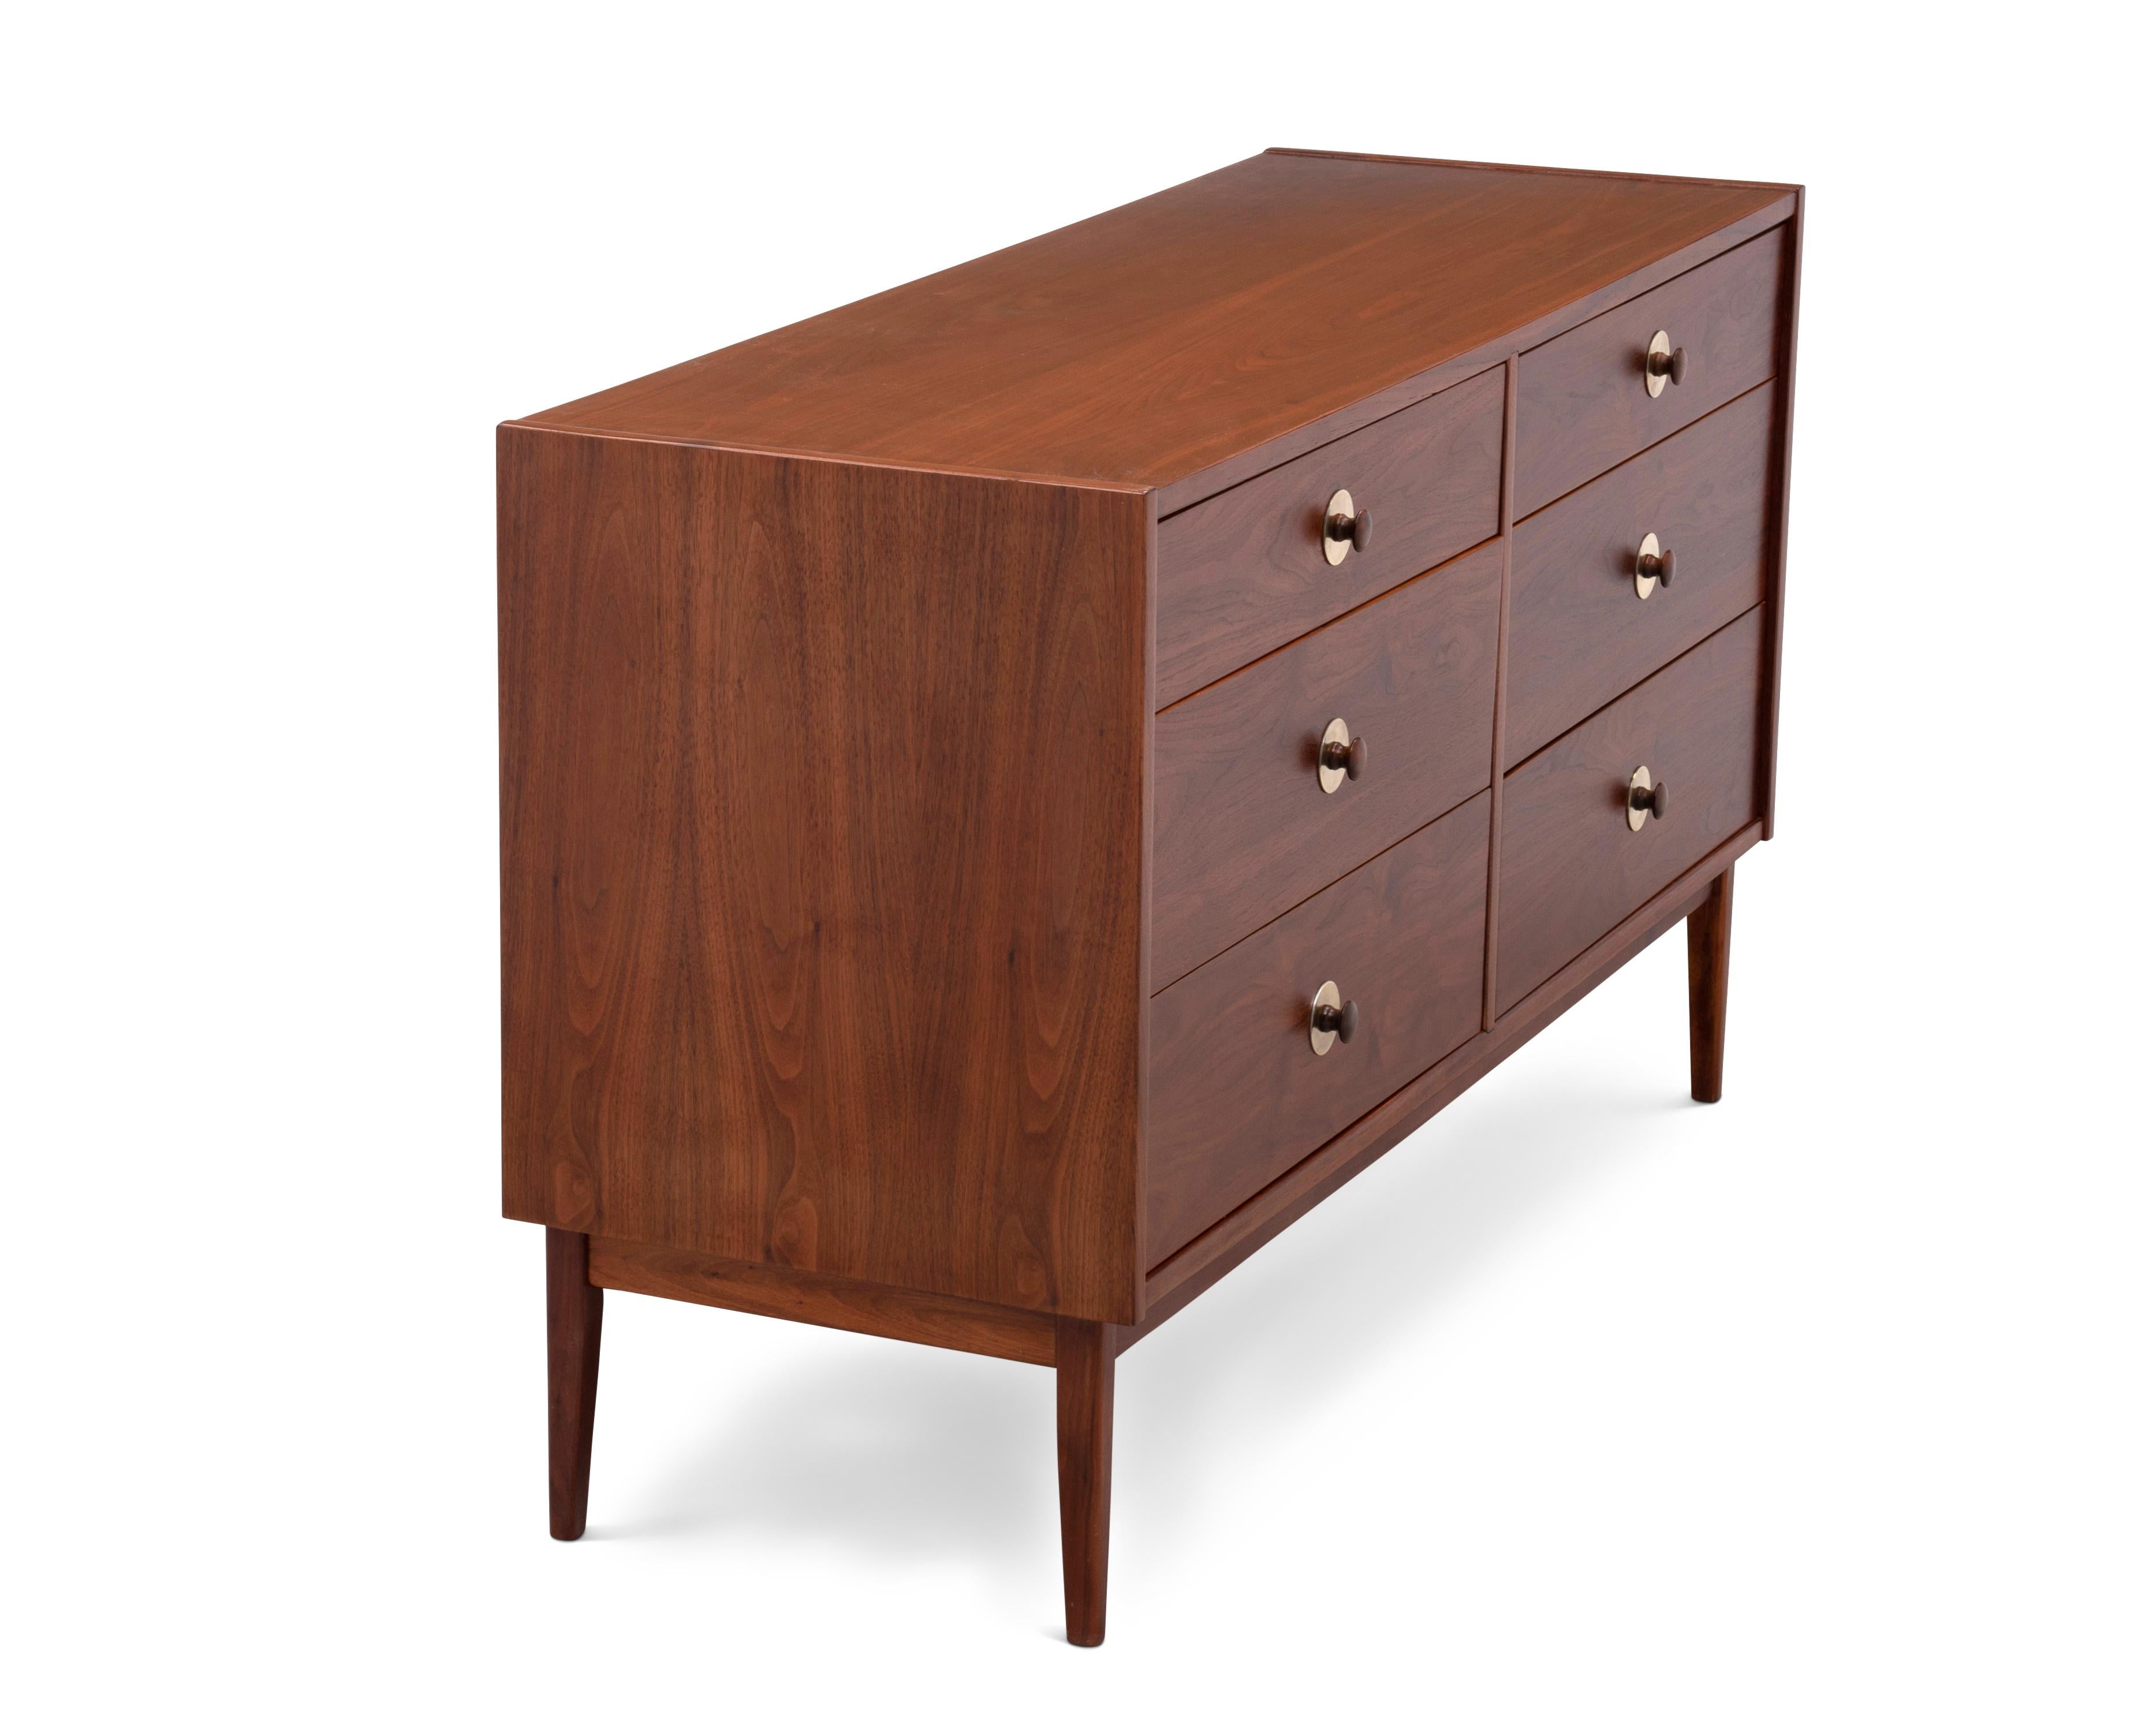 An elegant and very well made Mid-Century Modern six drawer lowboy dresser designed by Jack Cartwright for Founders Furniture. Walnut case with walnut and brass hardware. Unmarked.